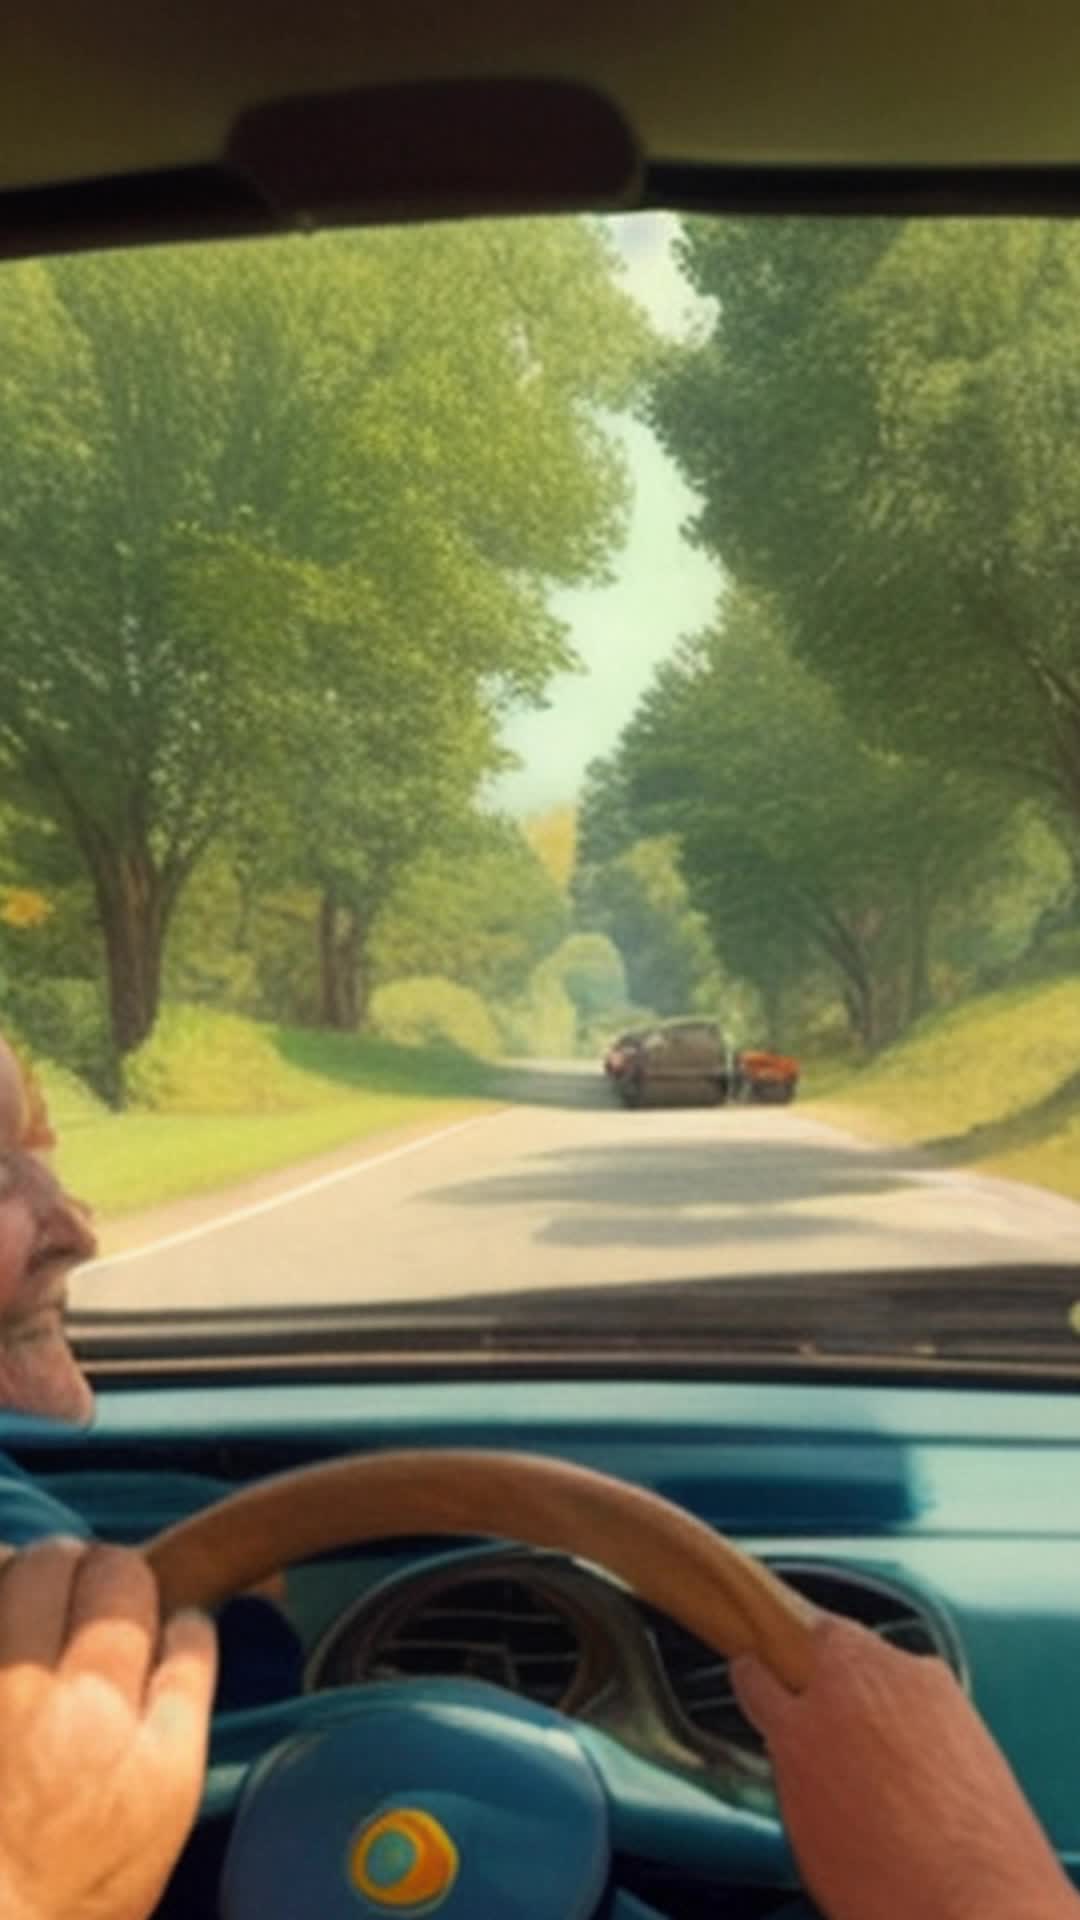 Driving scene, Tom and Linda at the front, kids interacting in back, lush countryside passing by, vibrant colors, sounds of laughter and talking, occasional glimpses of wildlife outside, window view, medium shot